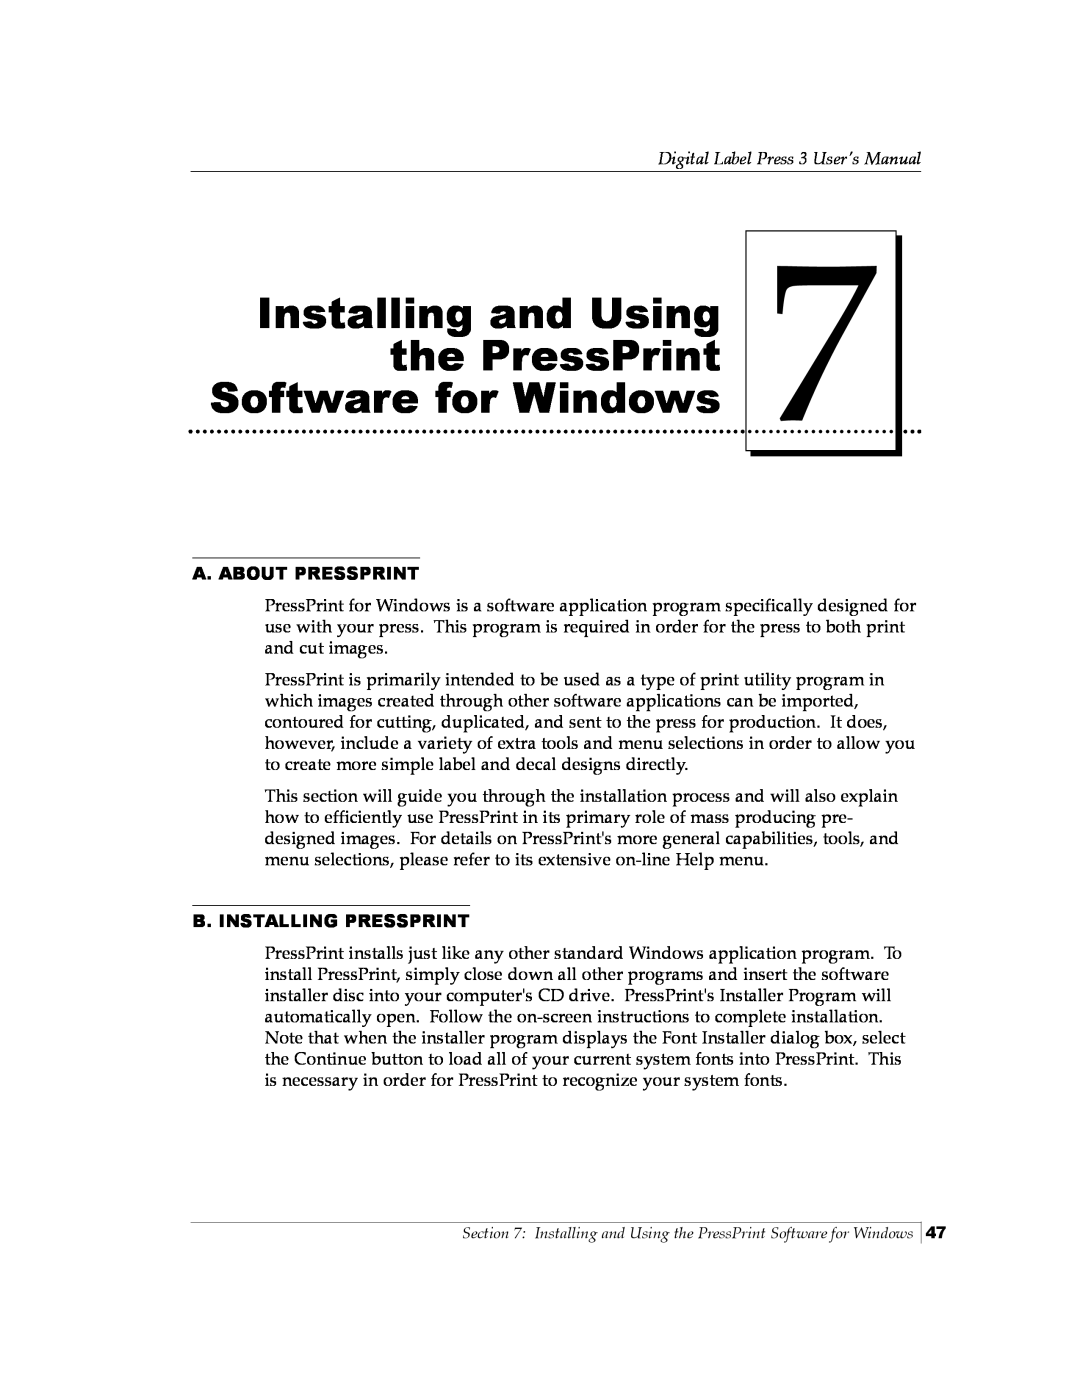 Primera Technology 510212 manual Installing and Using the PressPrint Software for Windows, A. About Pressprint 